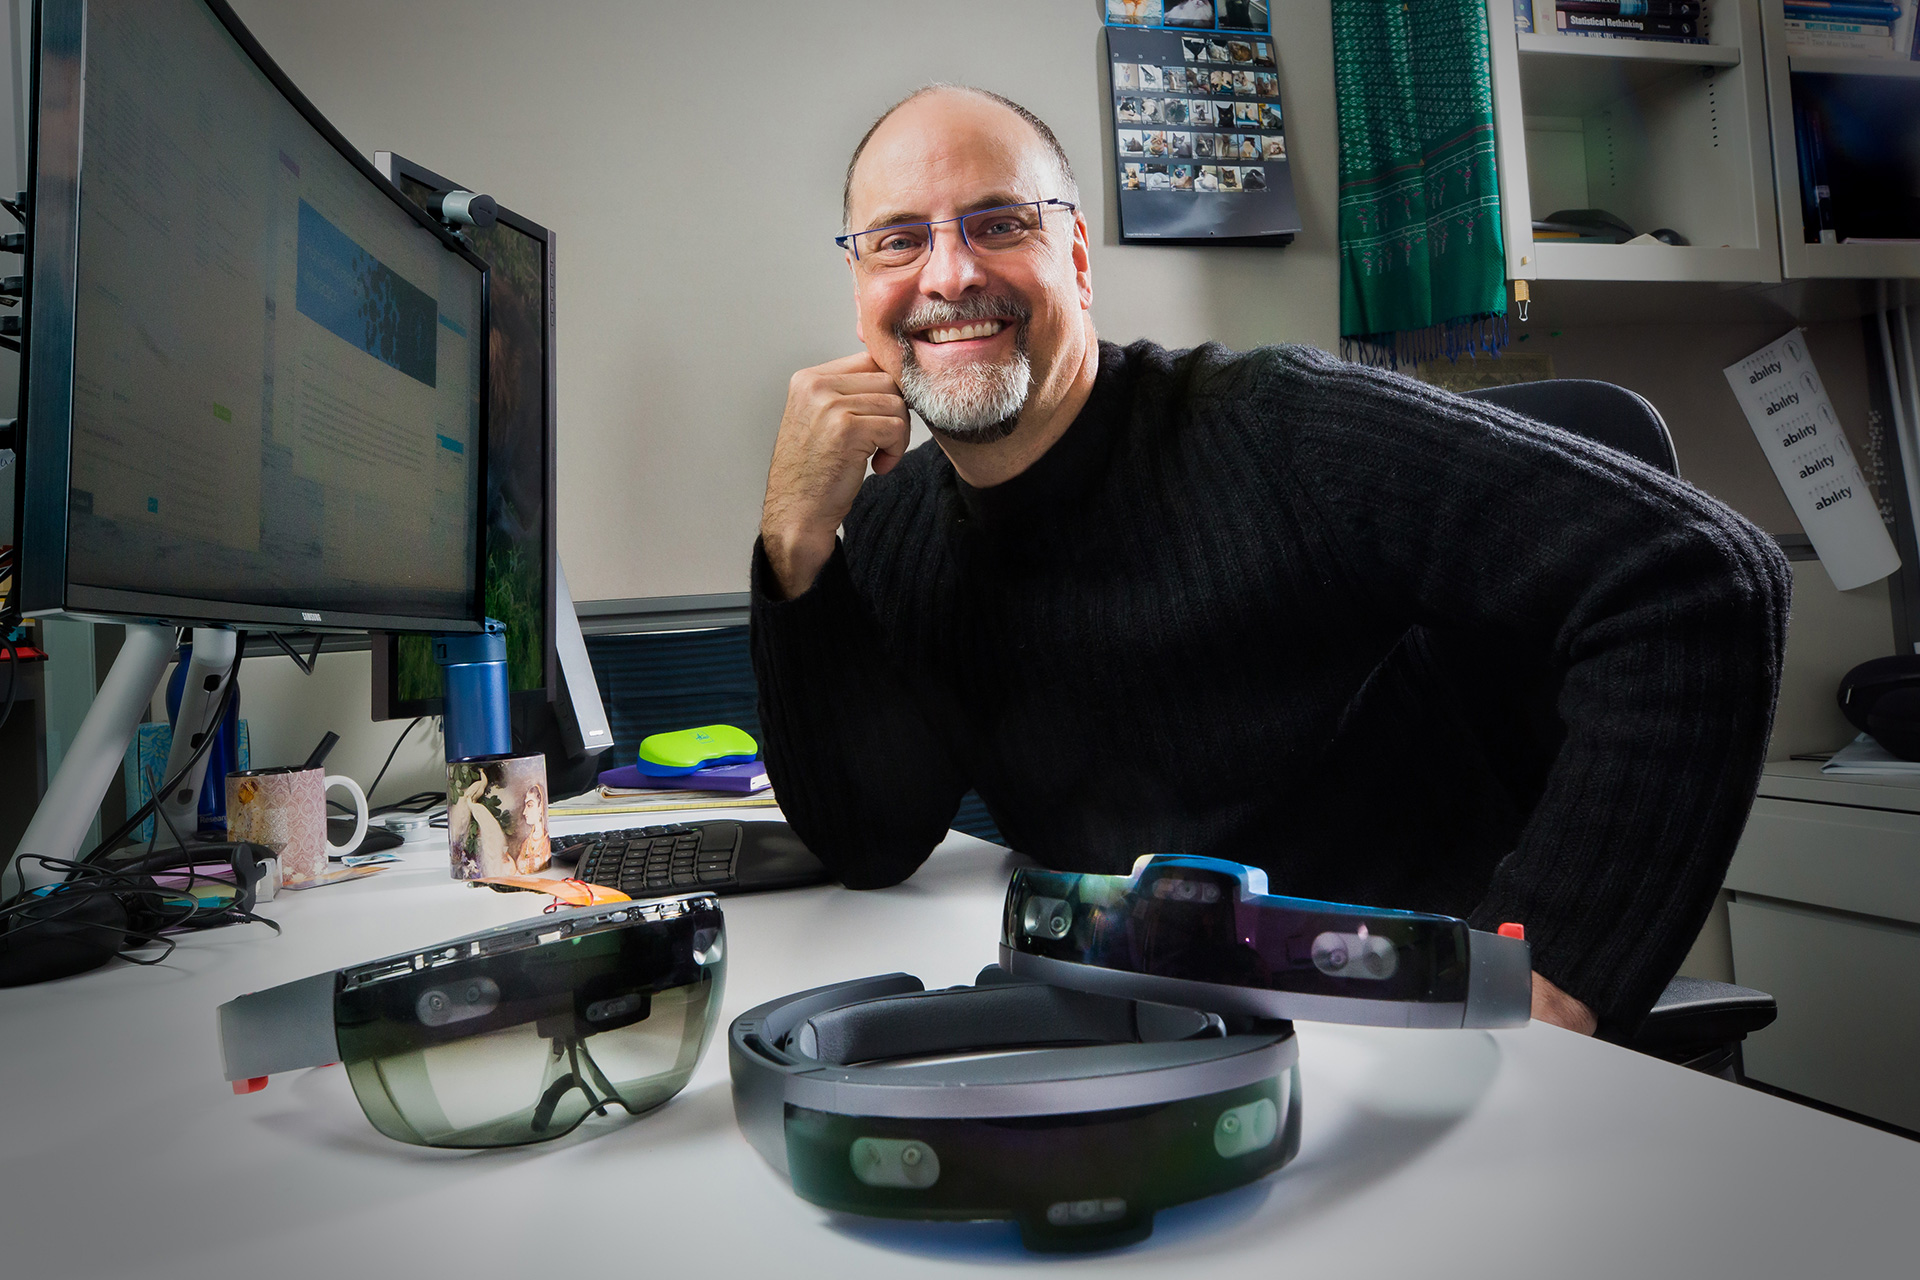 Microsoft researcher Ed Cutrell in his office with HoloLens devices sitting in front of him on his desk